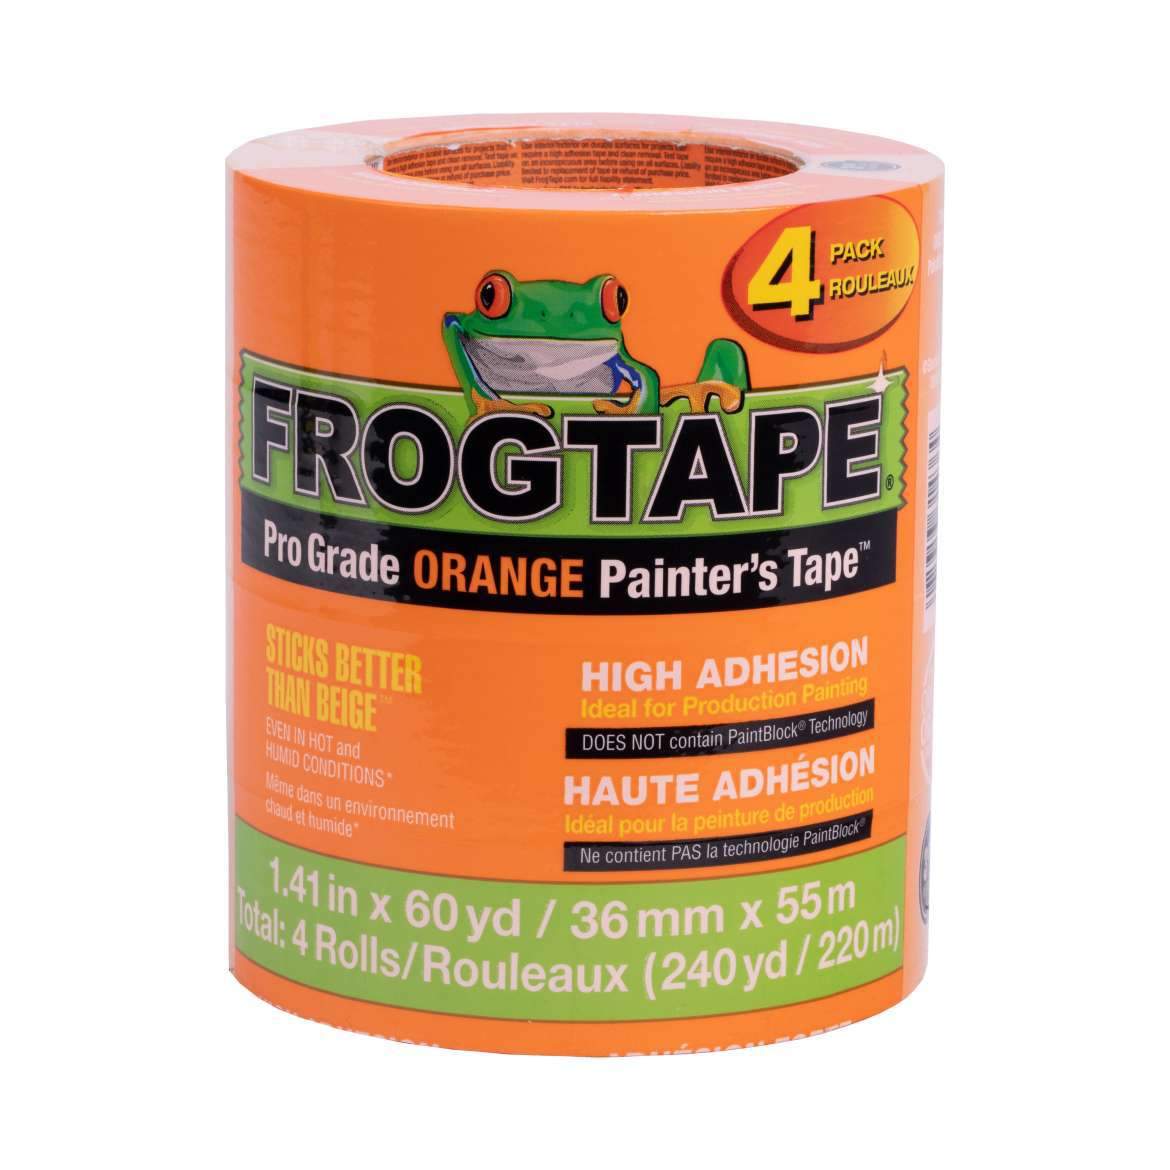 Orange frogtape high adhesion 4 pack, available at JC Licht in Chicago, IL.